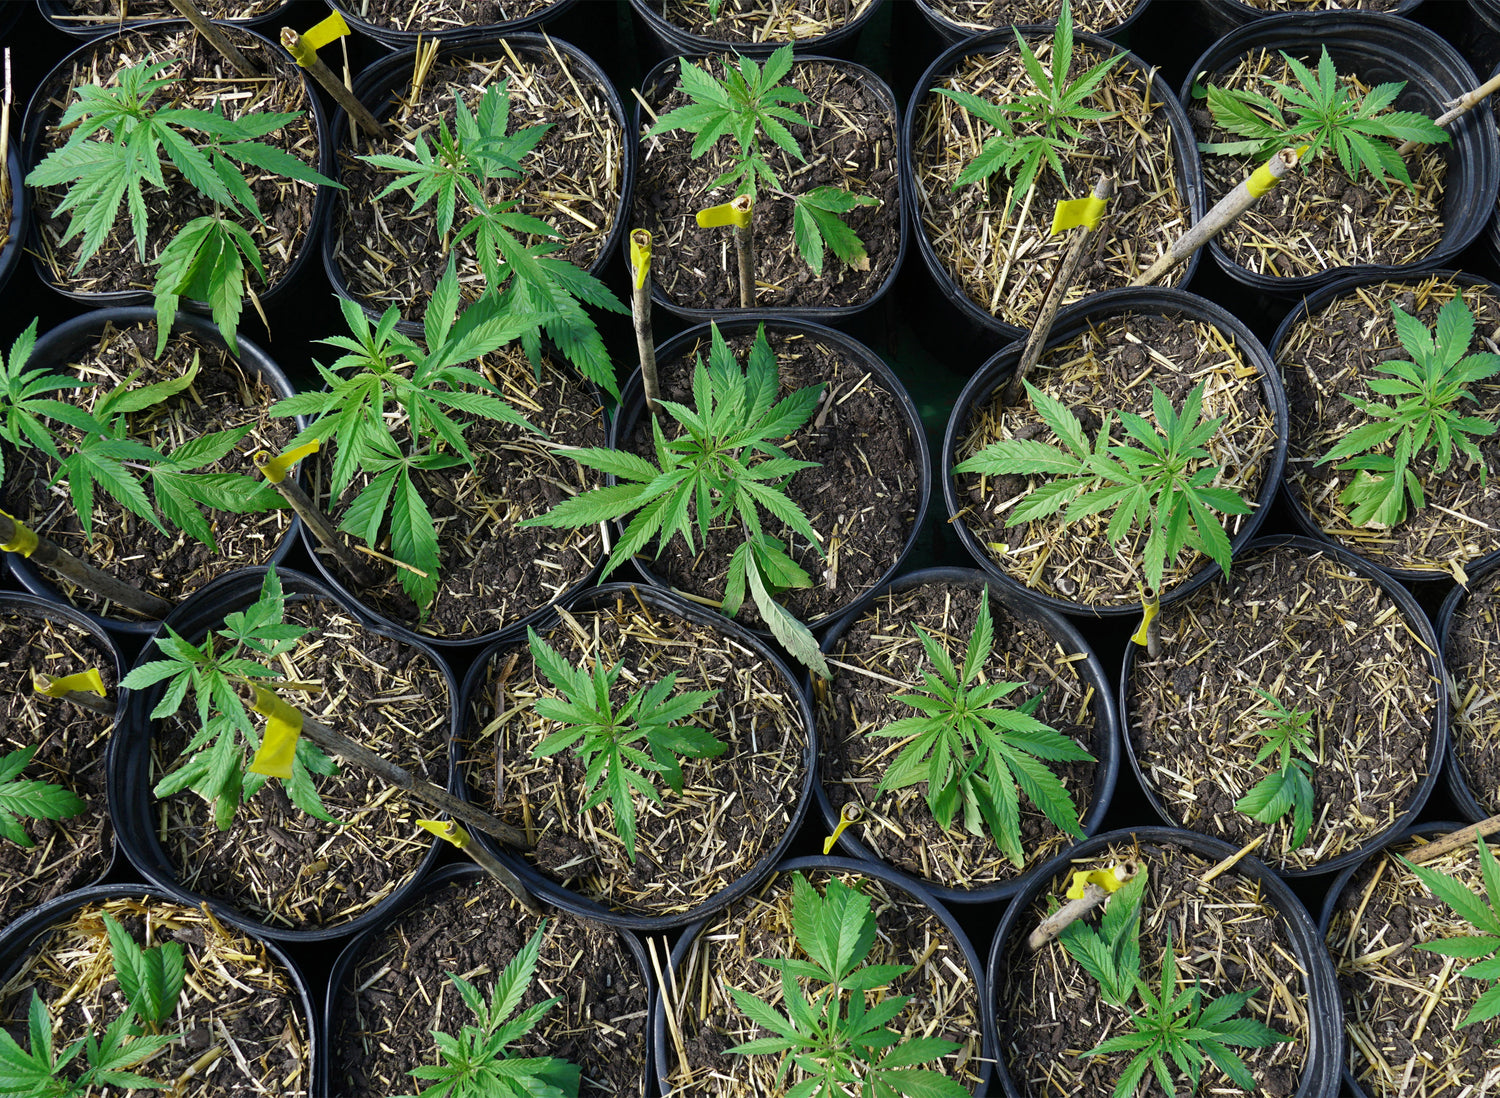 New York Approves Its First Recreational Cannabis Processor Licenses